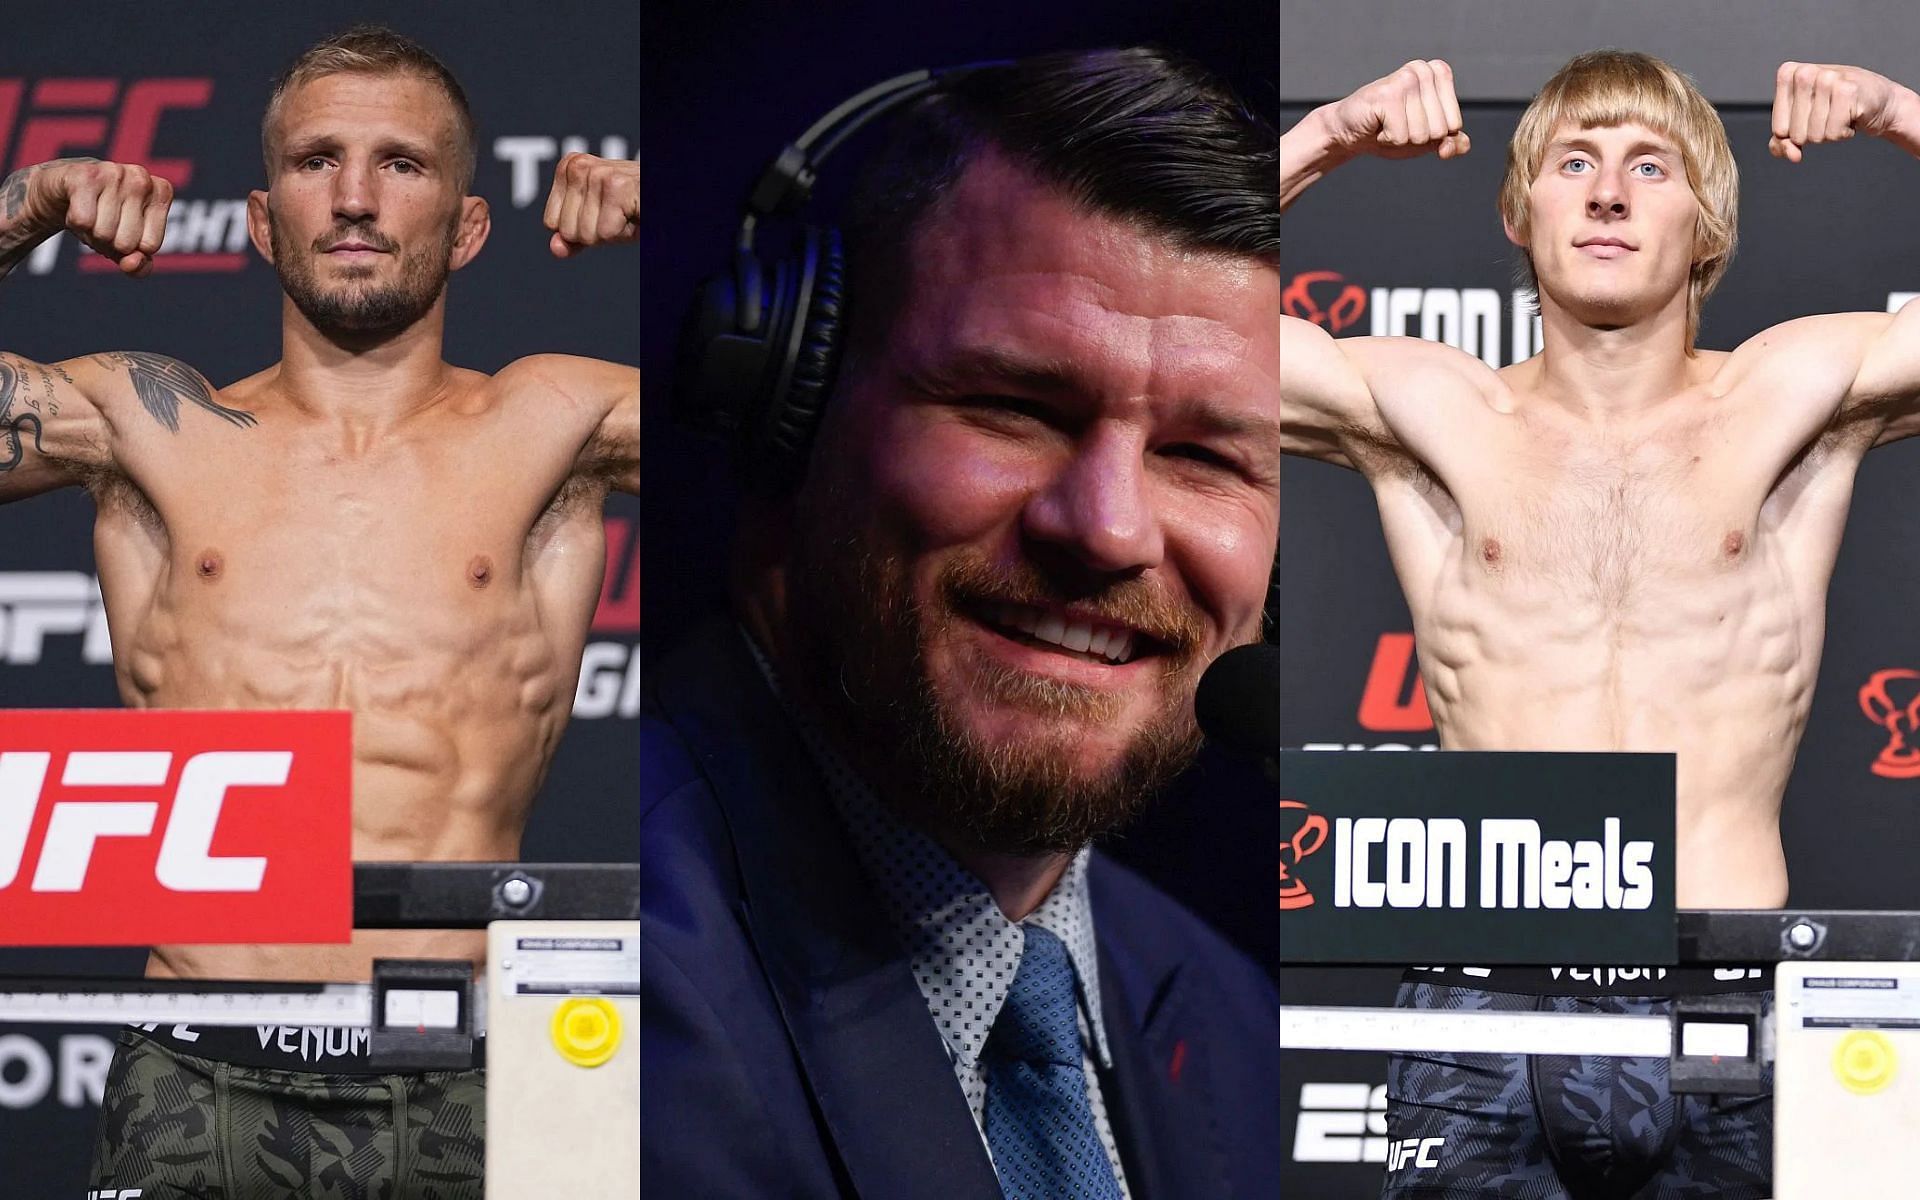 T.J. Dillashaw (left), Michael Bisping (center), and Paddy Pimblett (right) [Images courtesy of Getty]